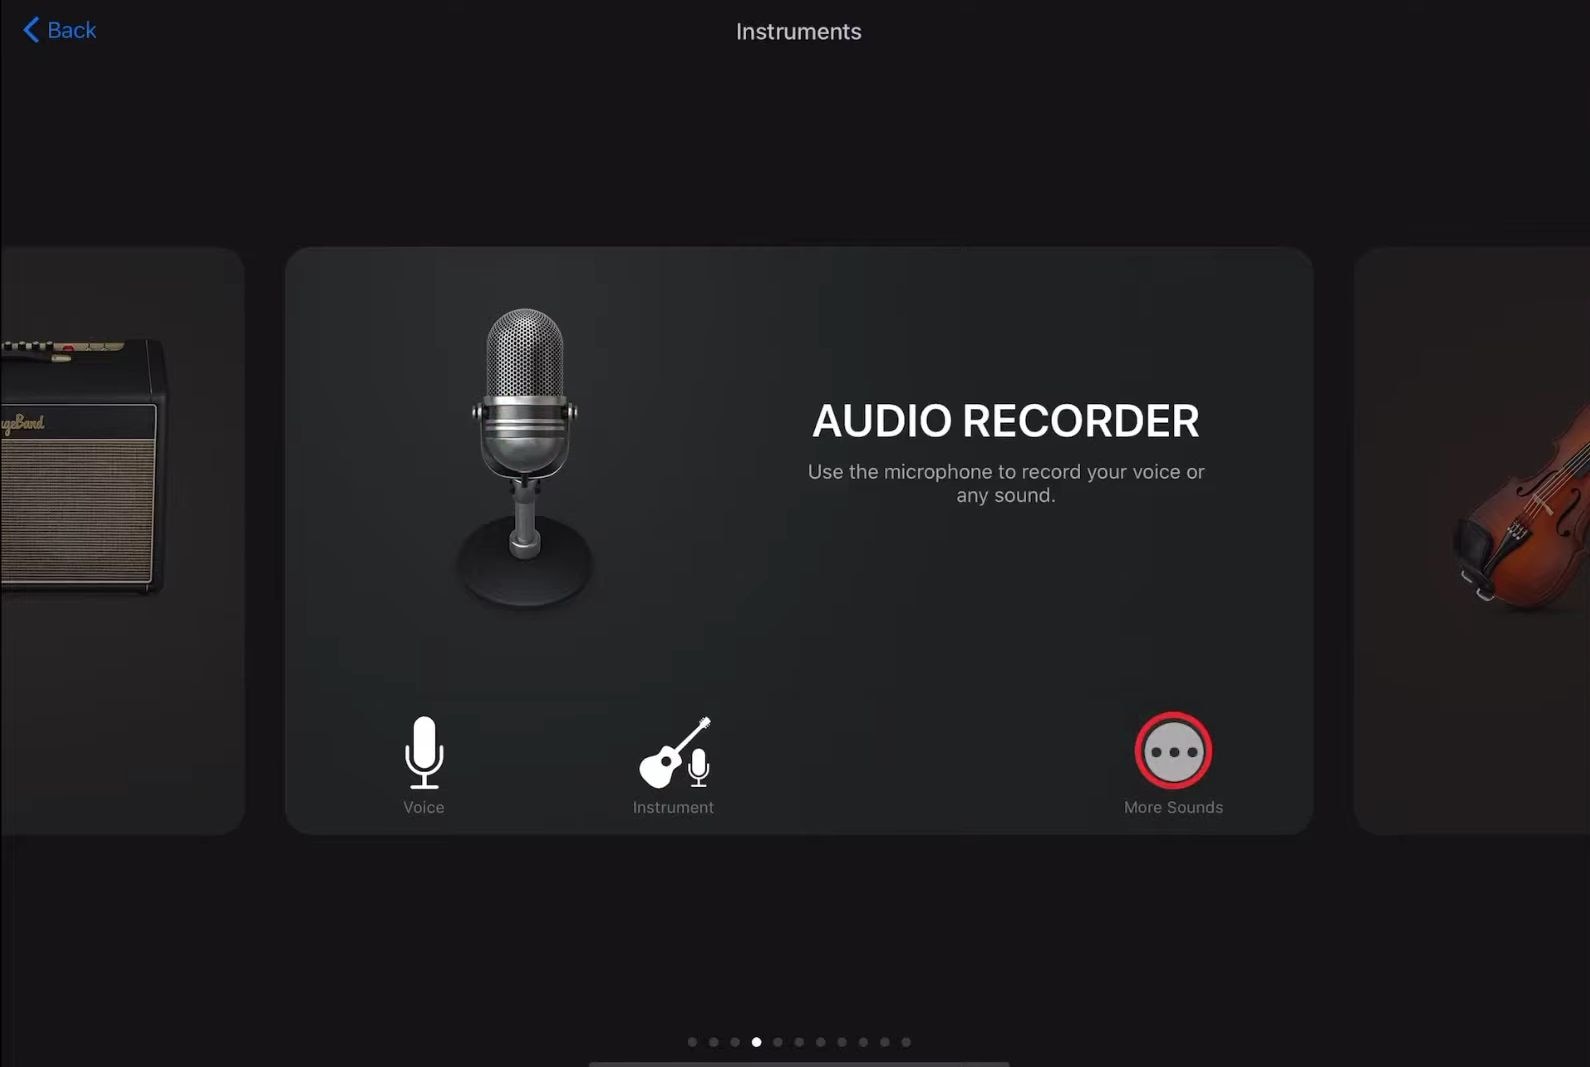 select the clean audio option